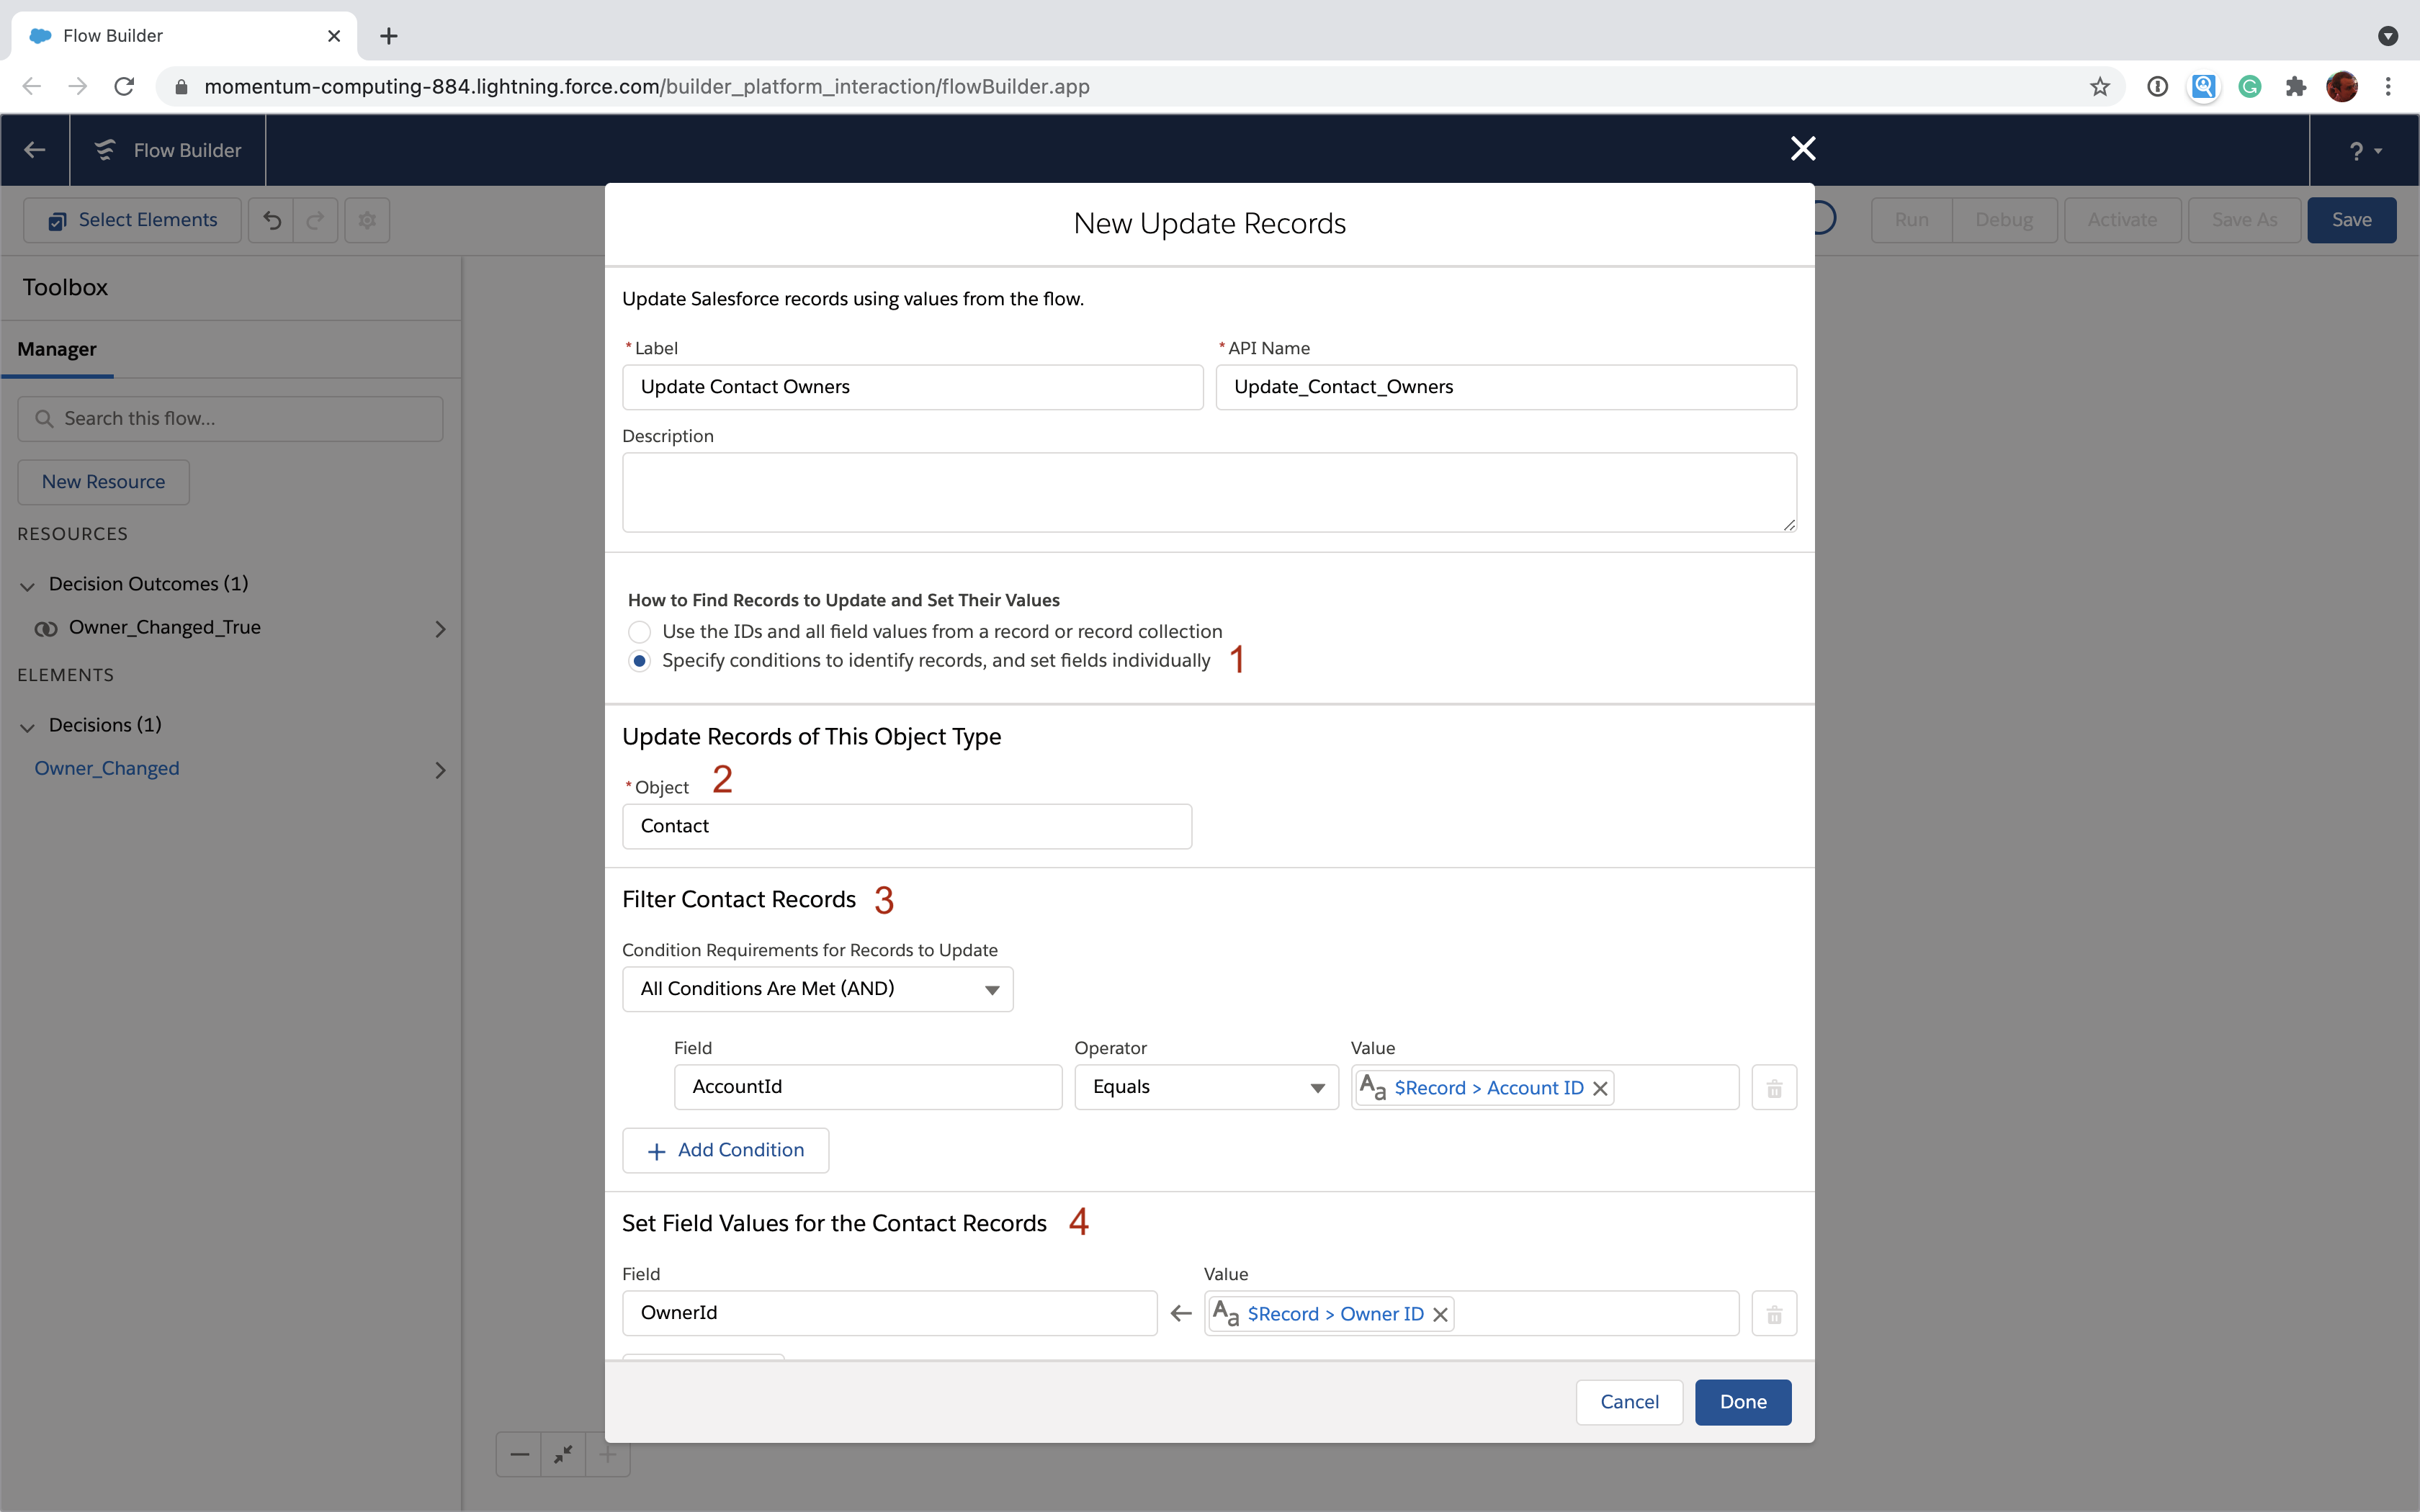 Salesforce Flow Update Records element changing Contact OwnerIds